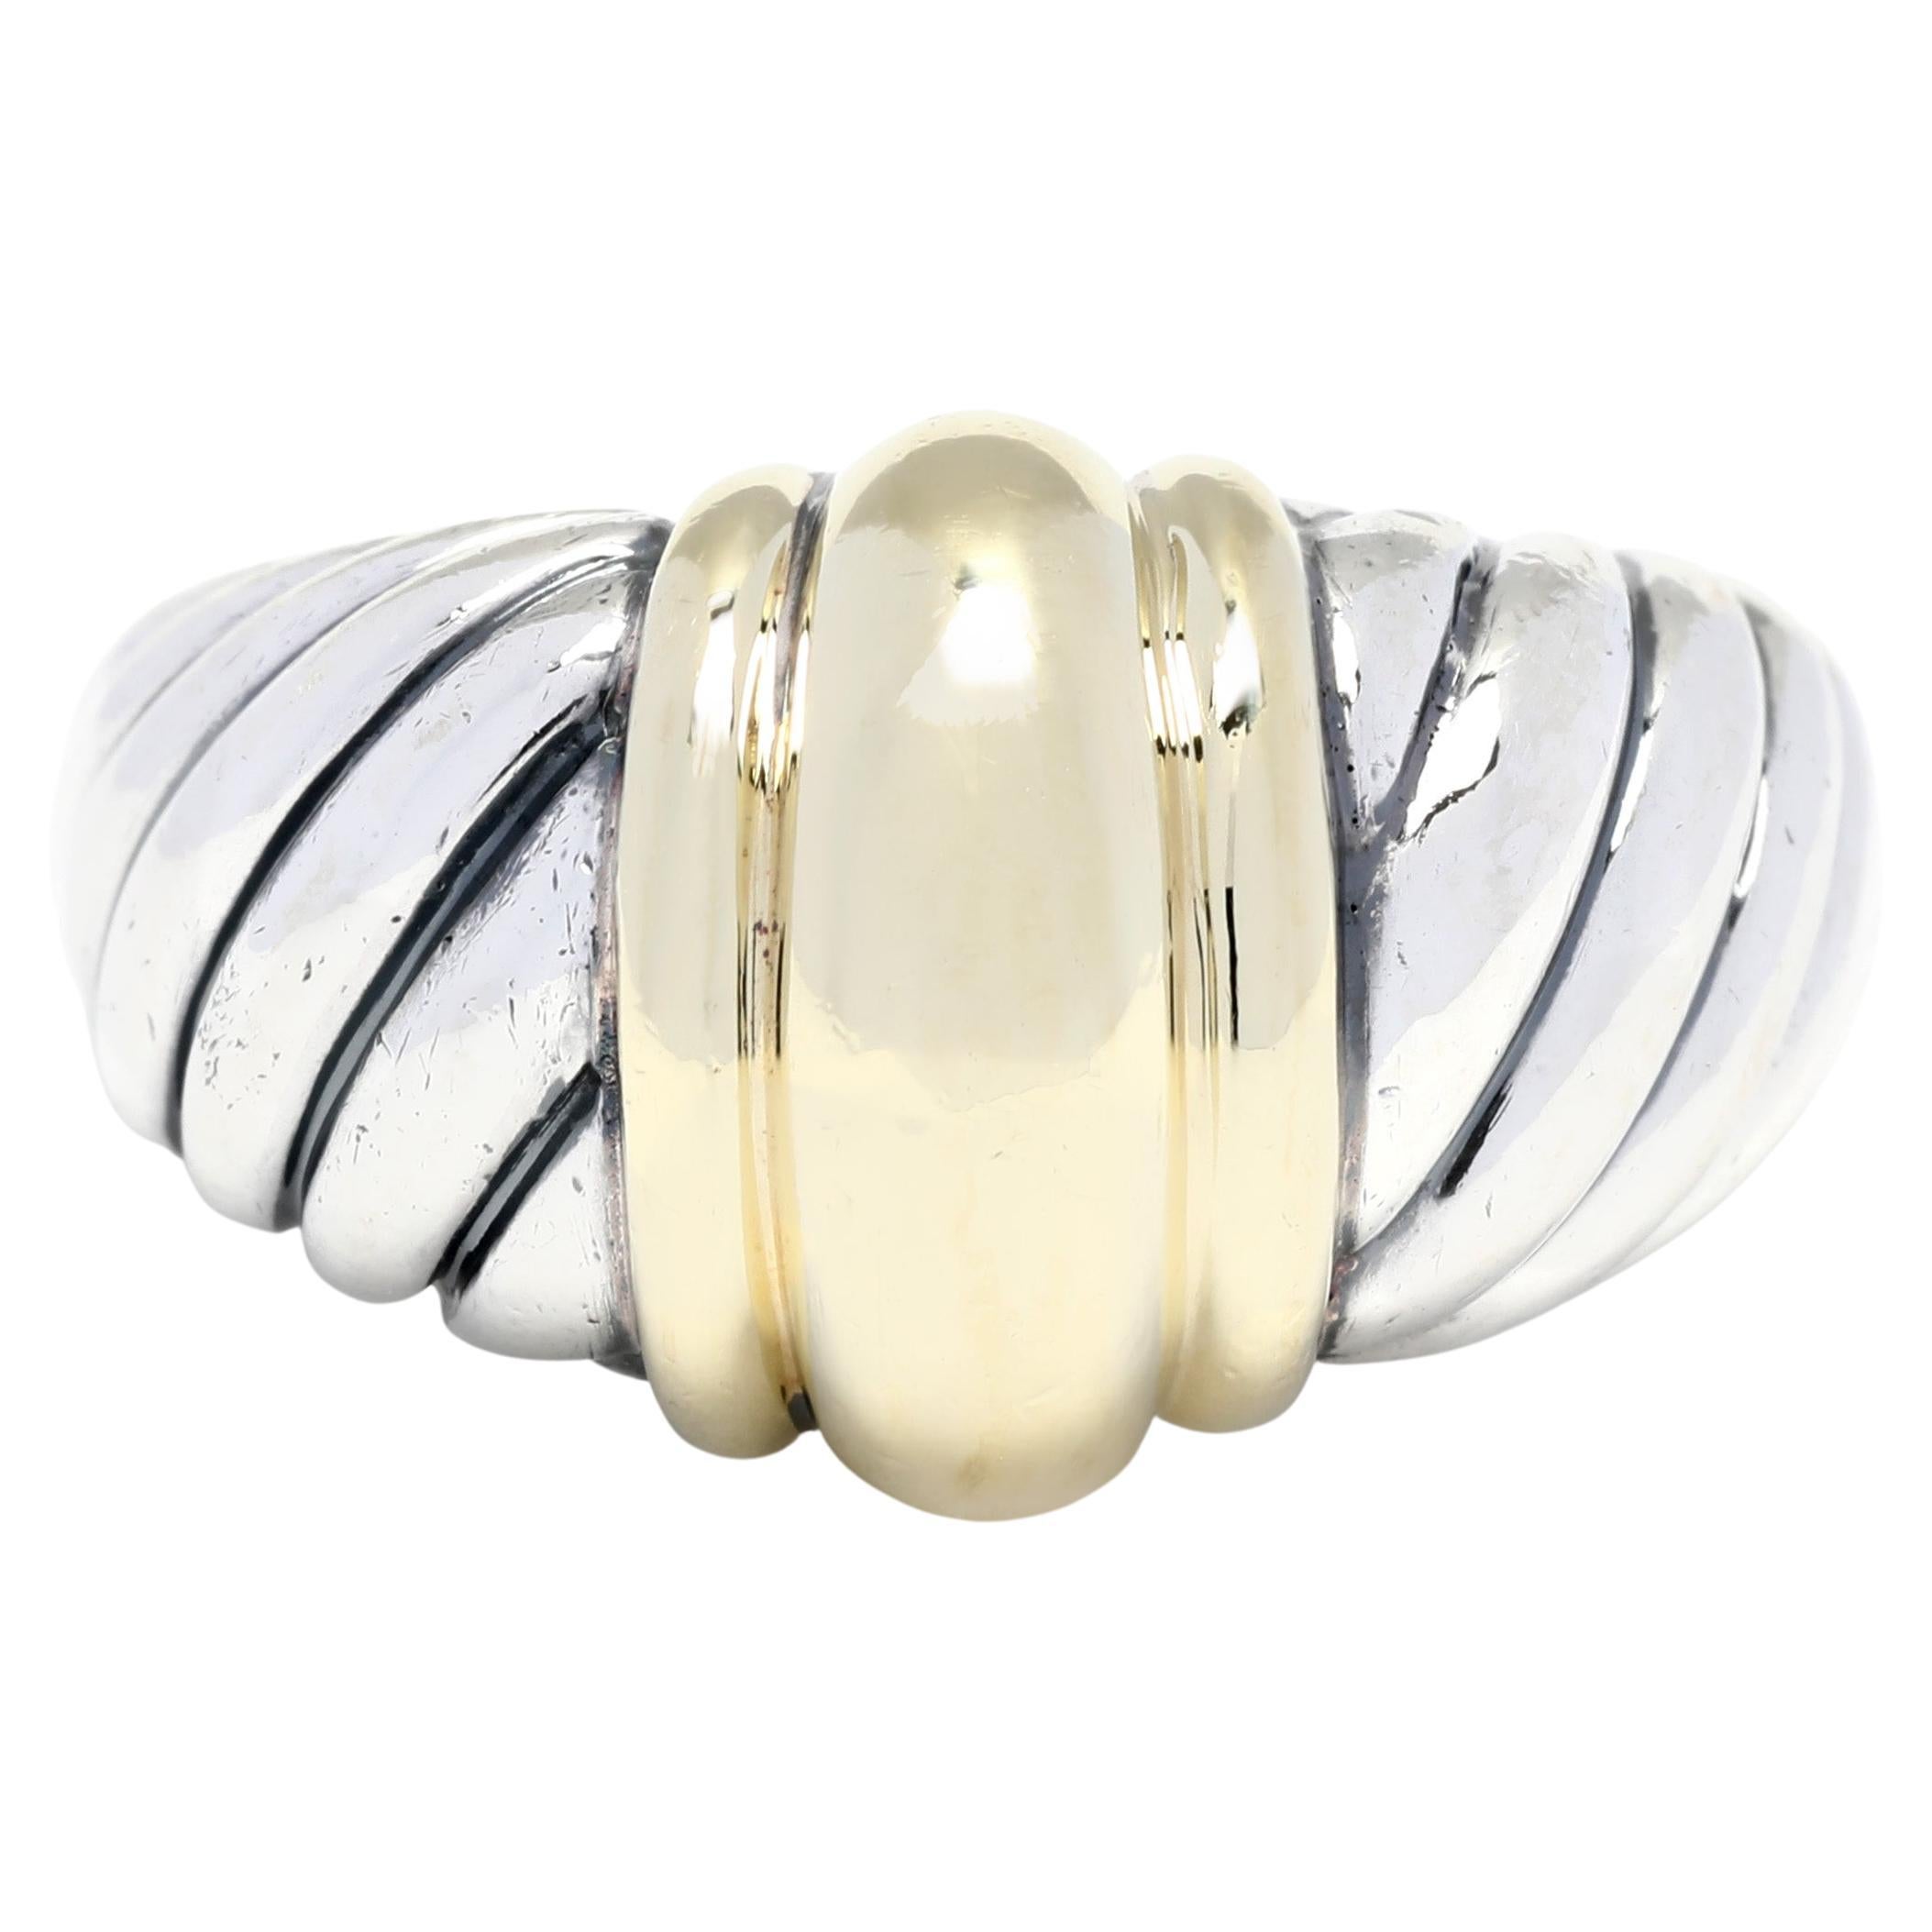 David Yurman Thoroughbred Dome Ring, or jaune 14 carats et argent sterling, 5,75 $